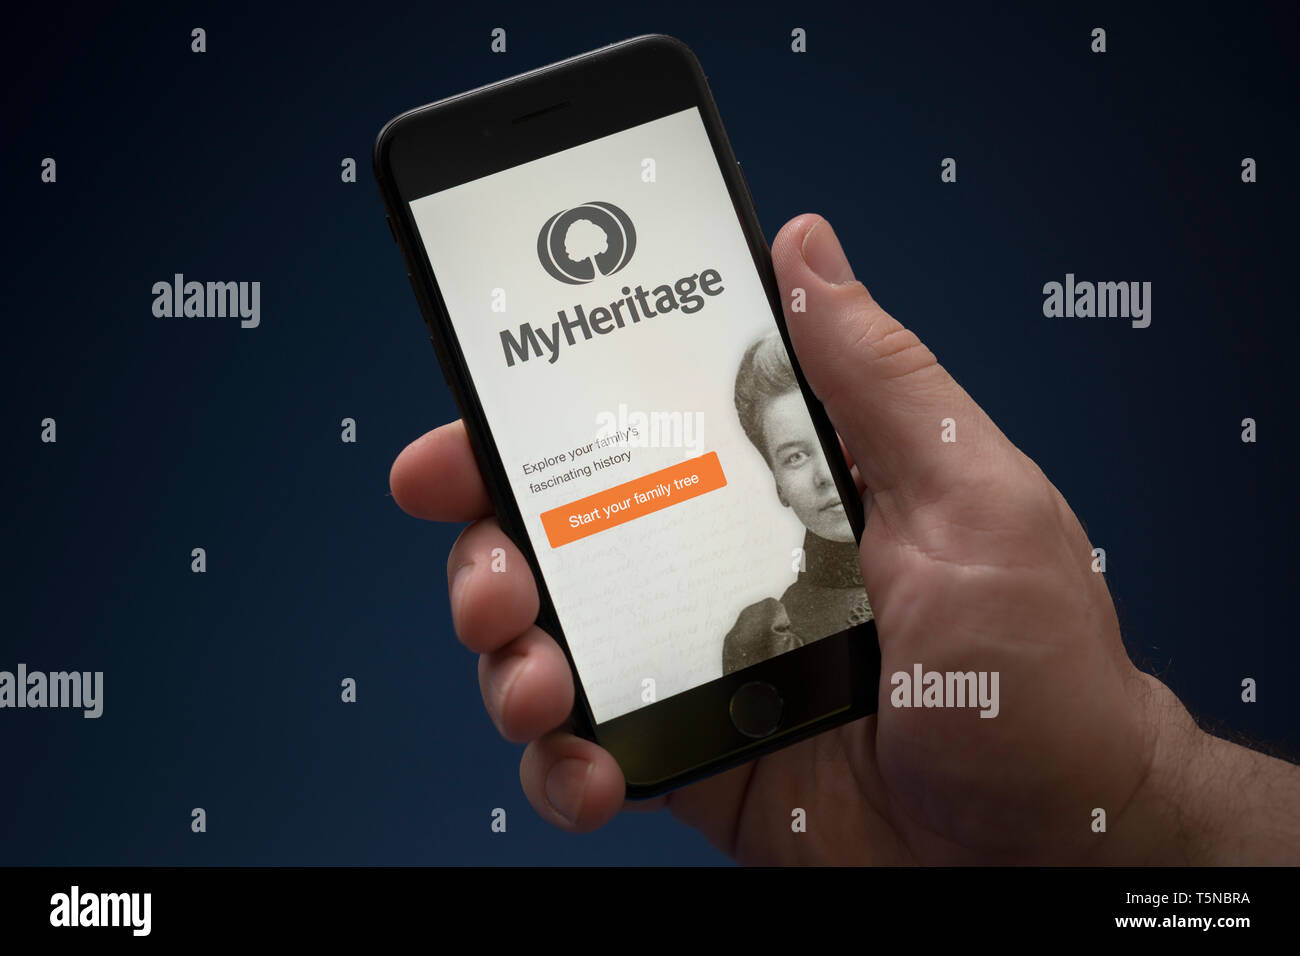 A man looks at his iPhone which displays the MyHeritage logo (Editorial use only). Stock Photo